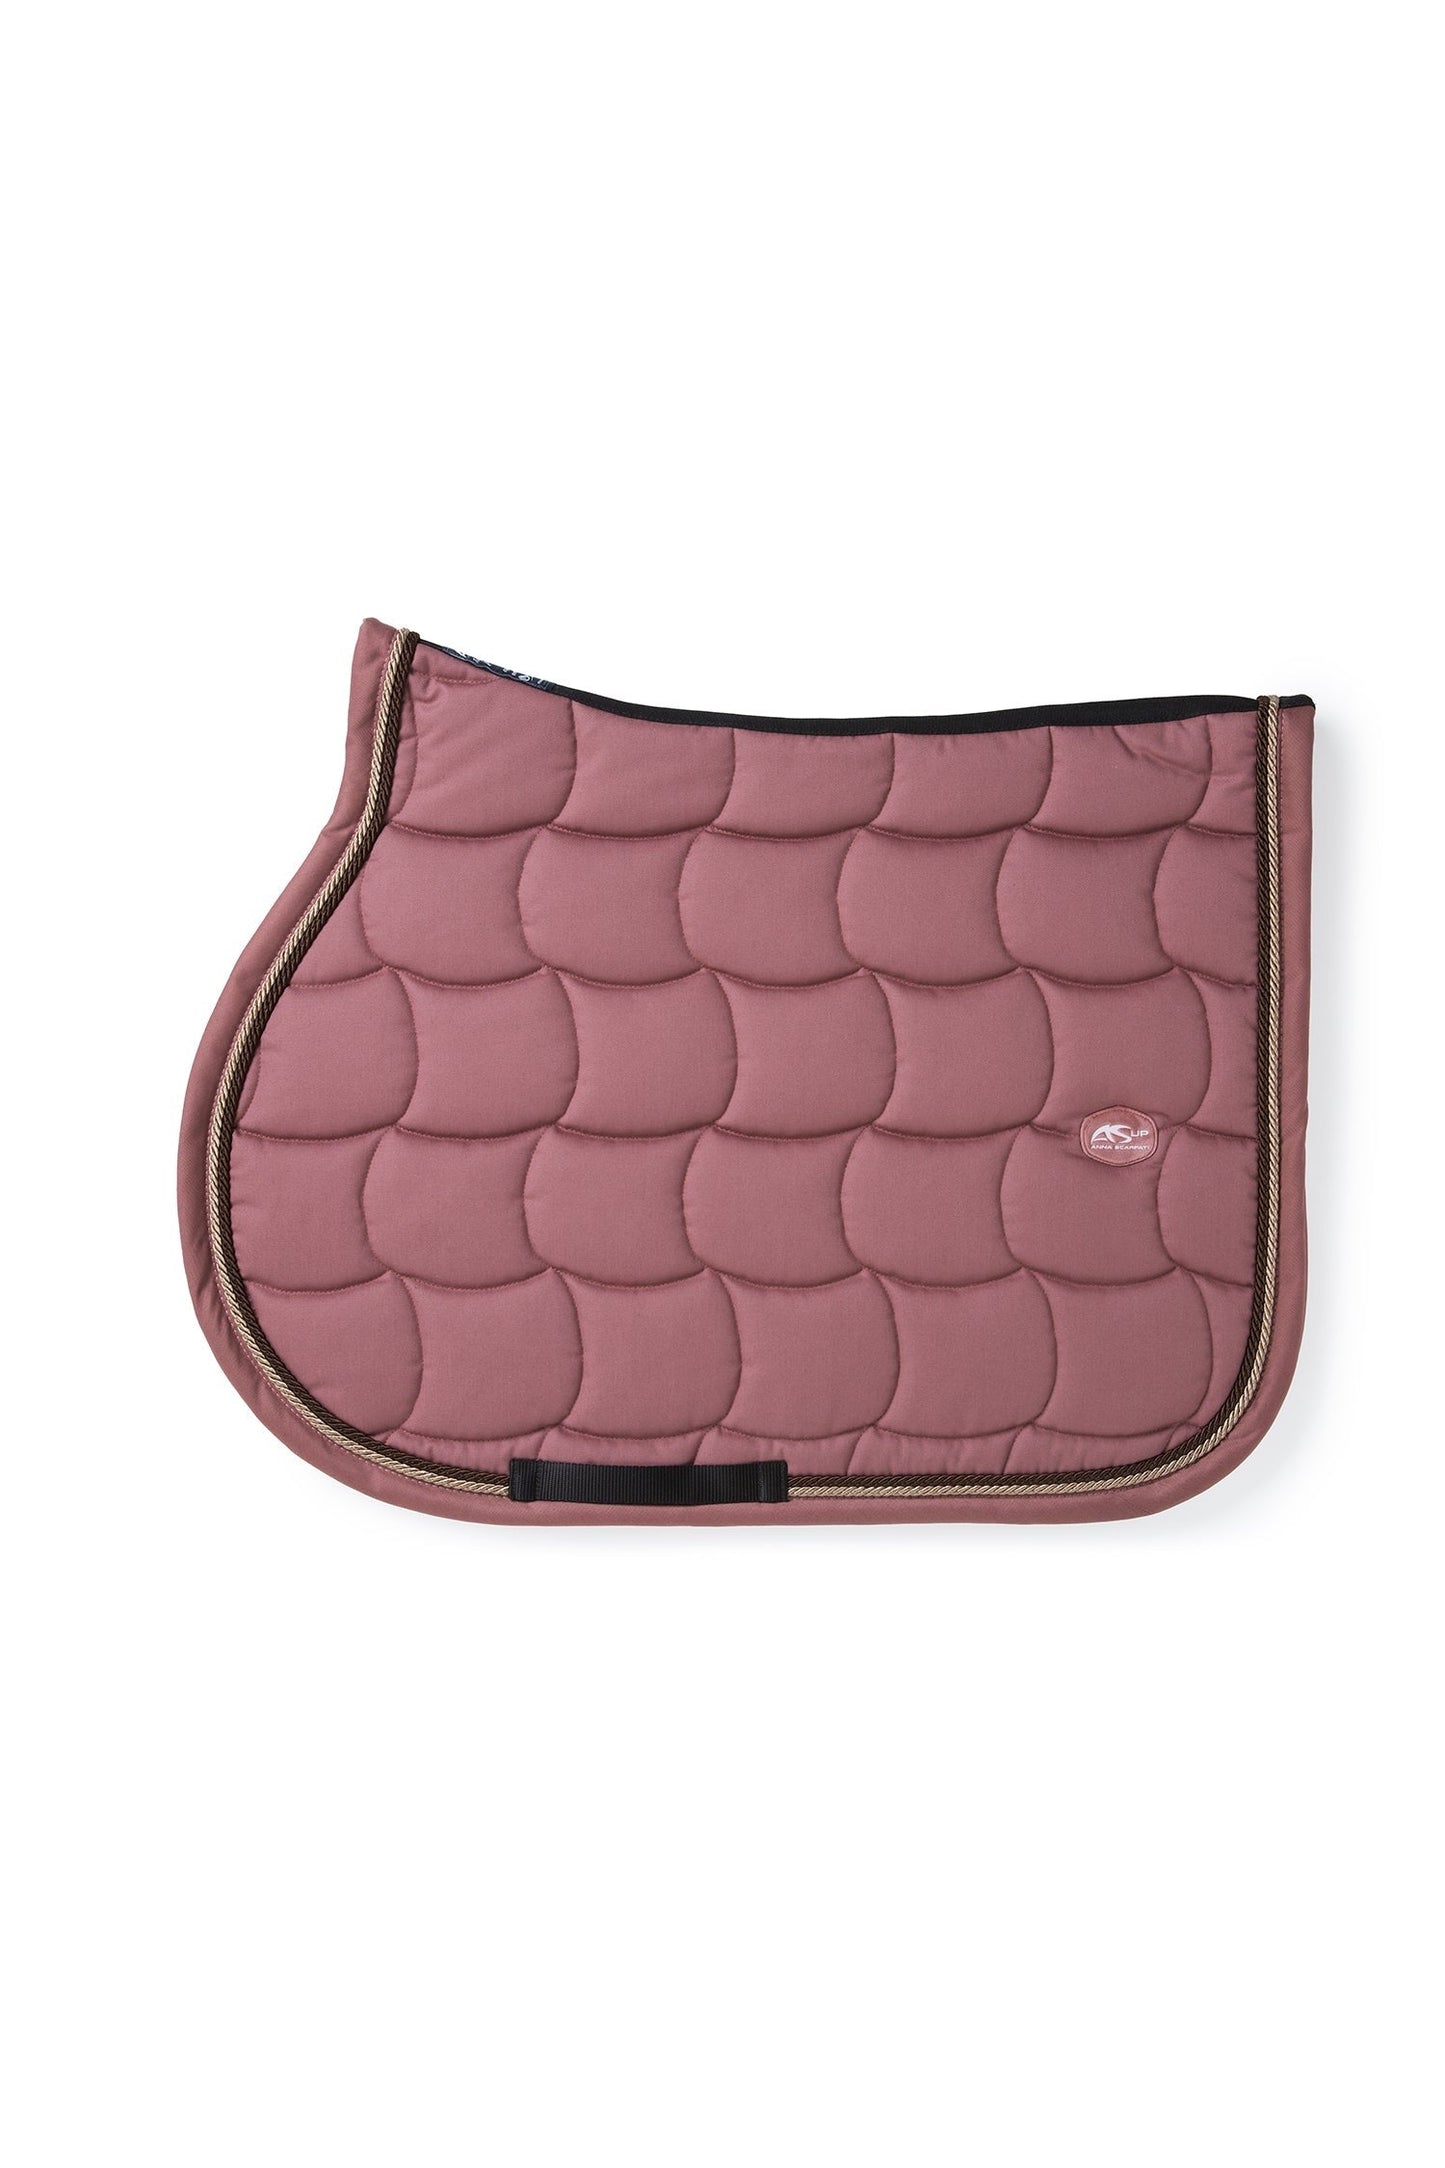 Anna Scarpati quilted horse saddle pad in mauve with piping.